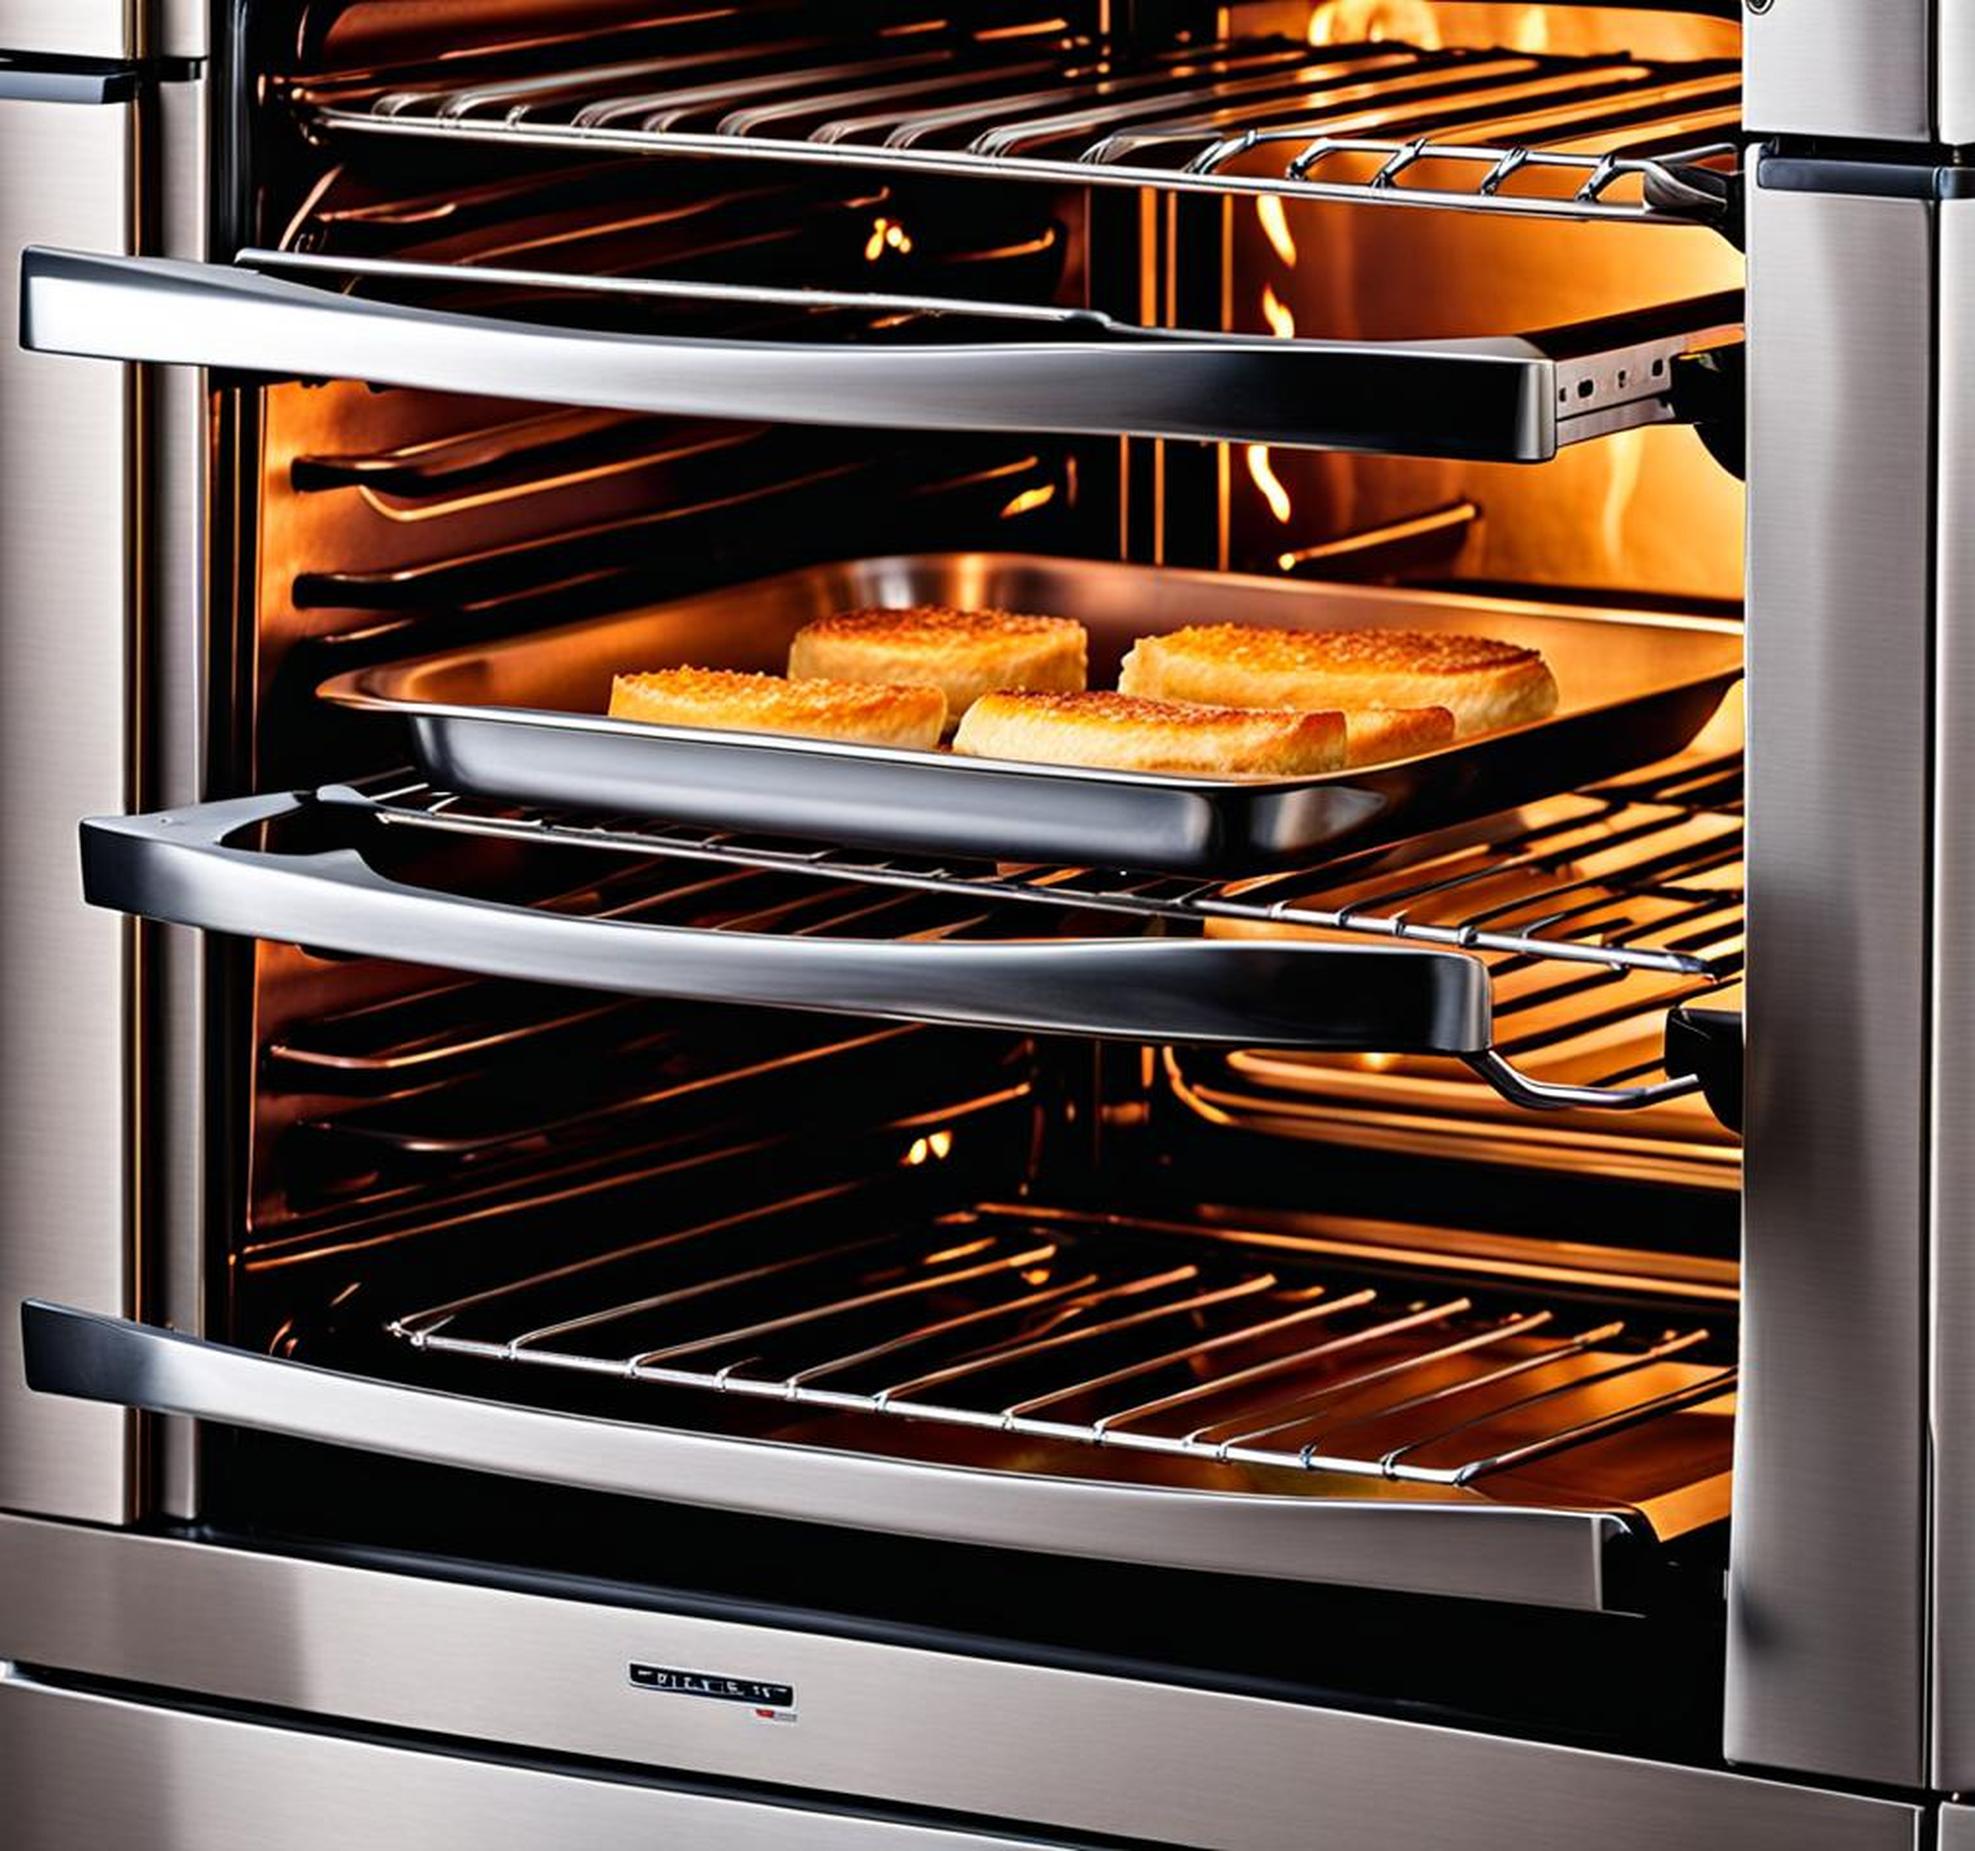 Is Your Stainless Steel Oven-Safe? Here’s What You Need to Know